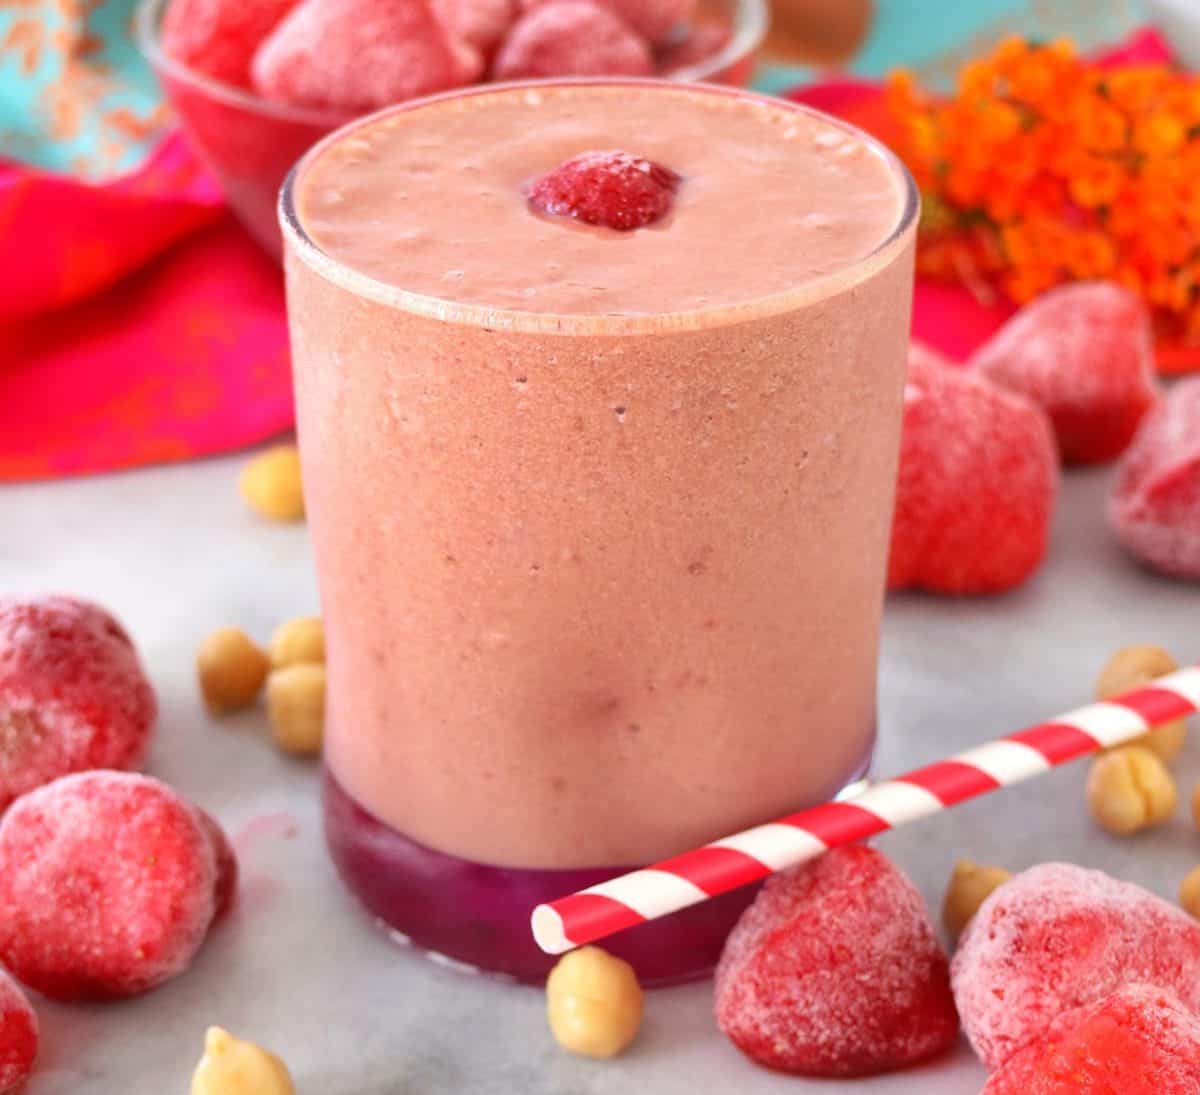 Vibrant pink smoothie in clear, short glass, strawberries and chickpeas scattered in background